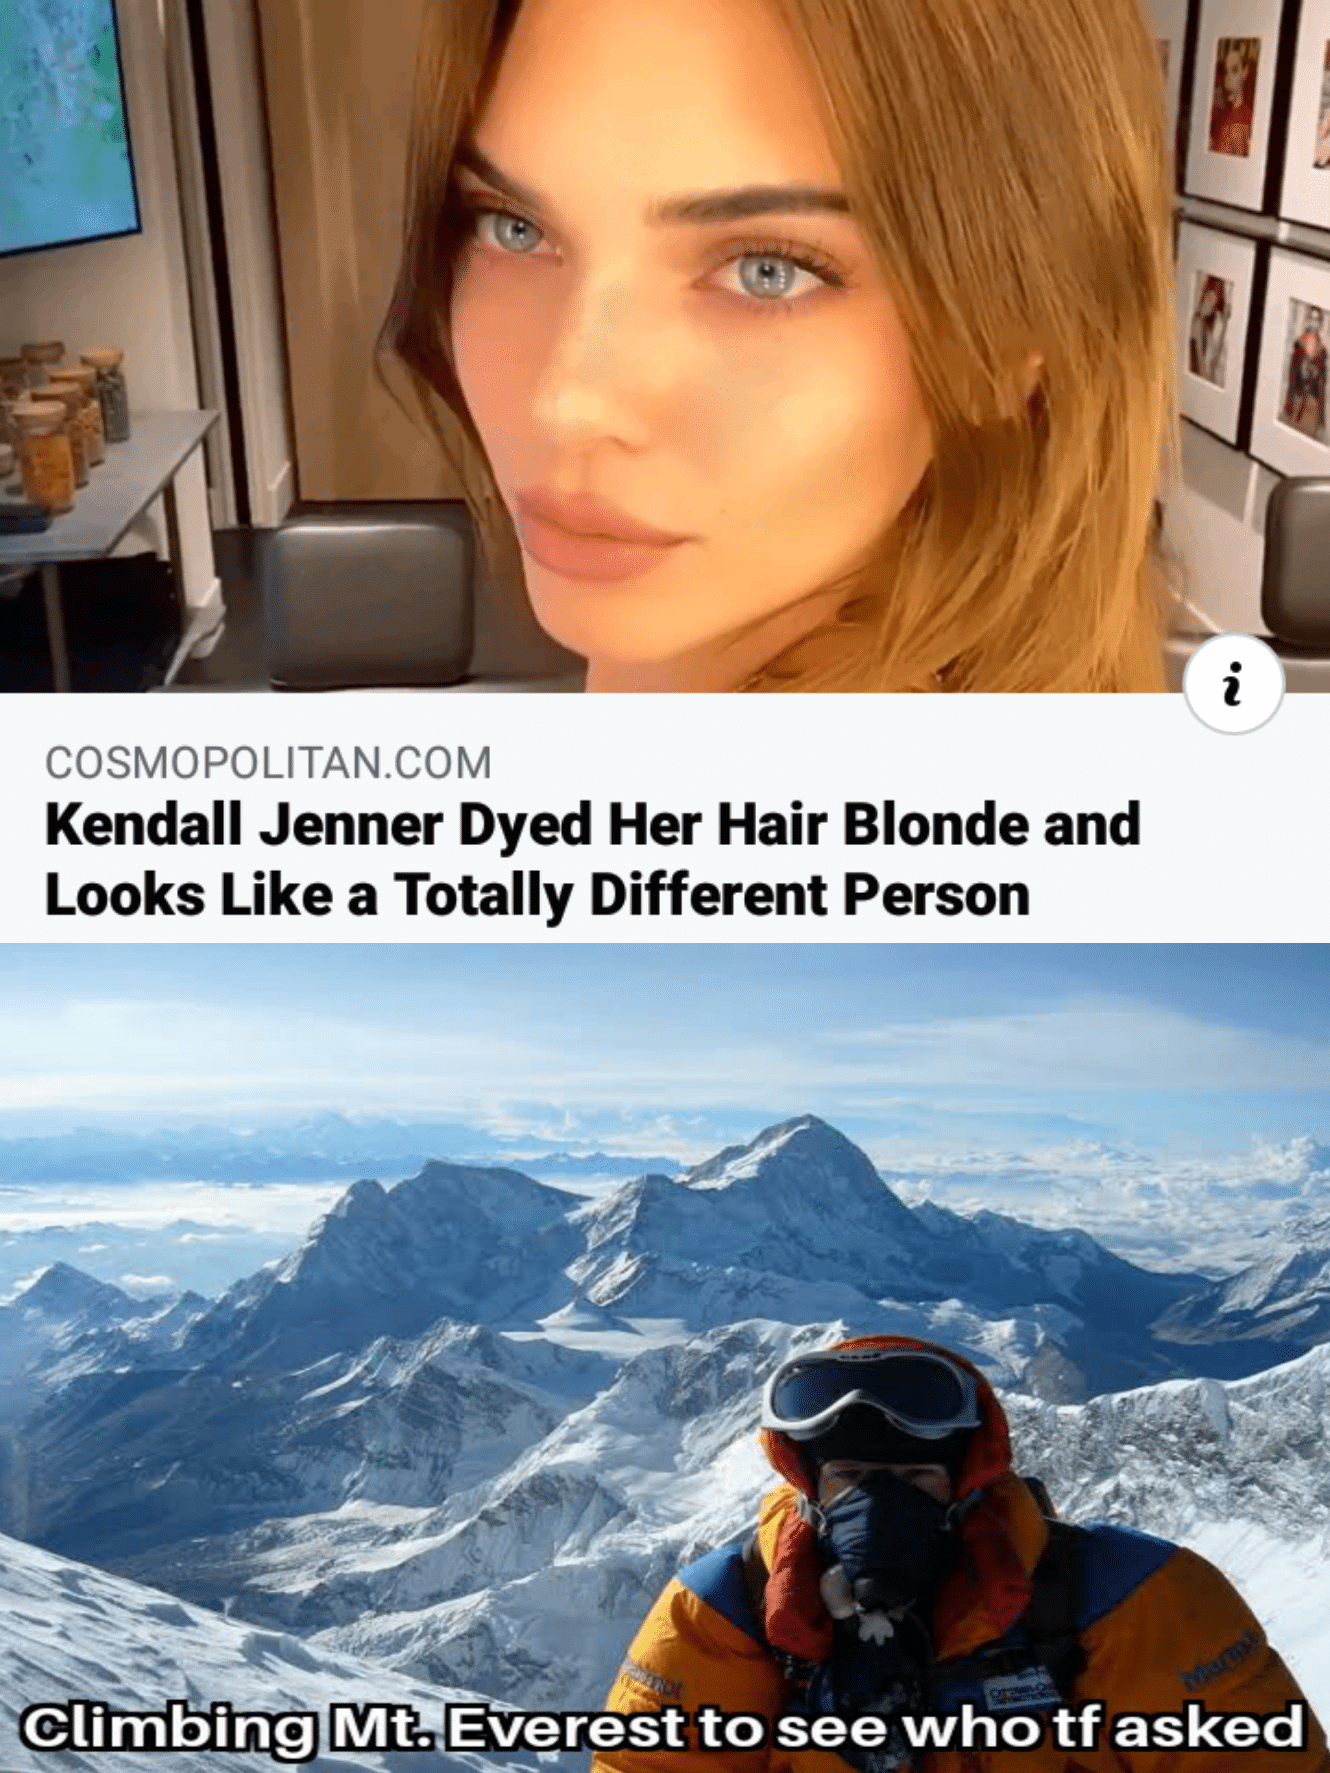 Funny, Kendall Jenner, Cosmopolitan, TF, Reddit, NotInteresting other memes Funny, Kendall Jenner, Cosmopolitan, TF, Reddit, NotInteresting text: COSMOPOLITAN.COM Kendall Jenner Dyed Her Hair Blonde and Looks Like a Totally Different Person .limbing Mt, Everest to see who tf asked 